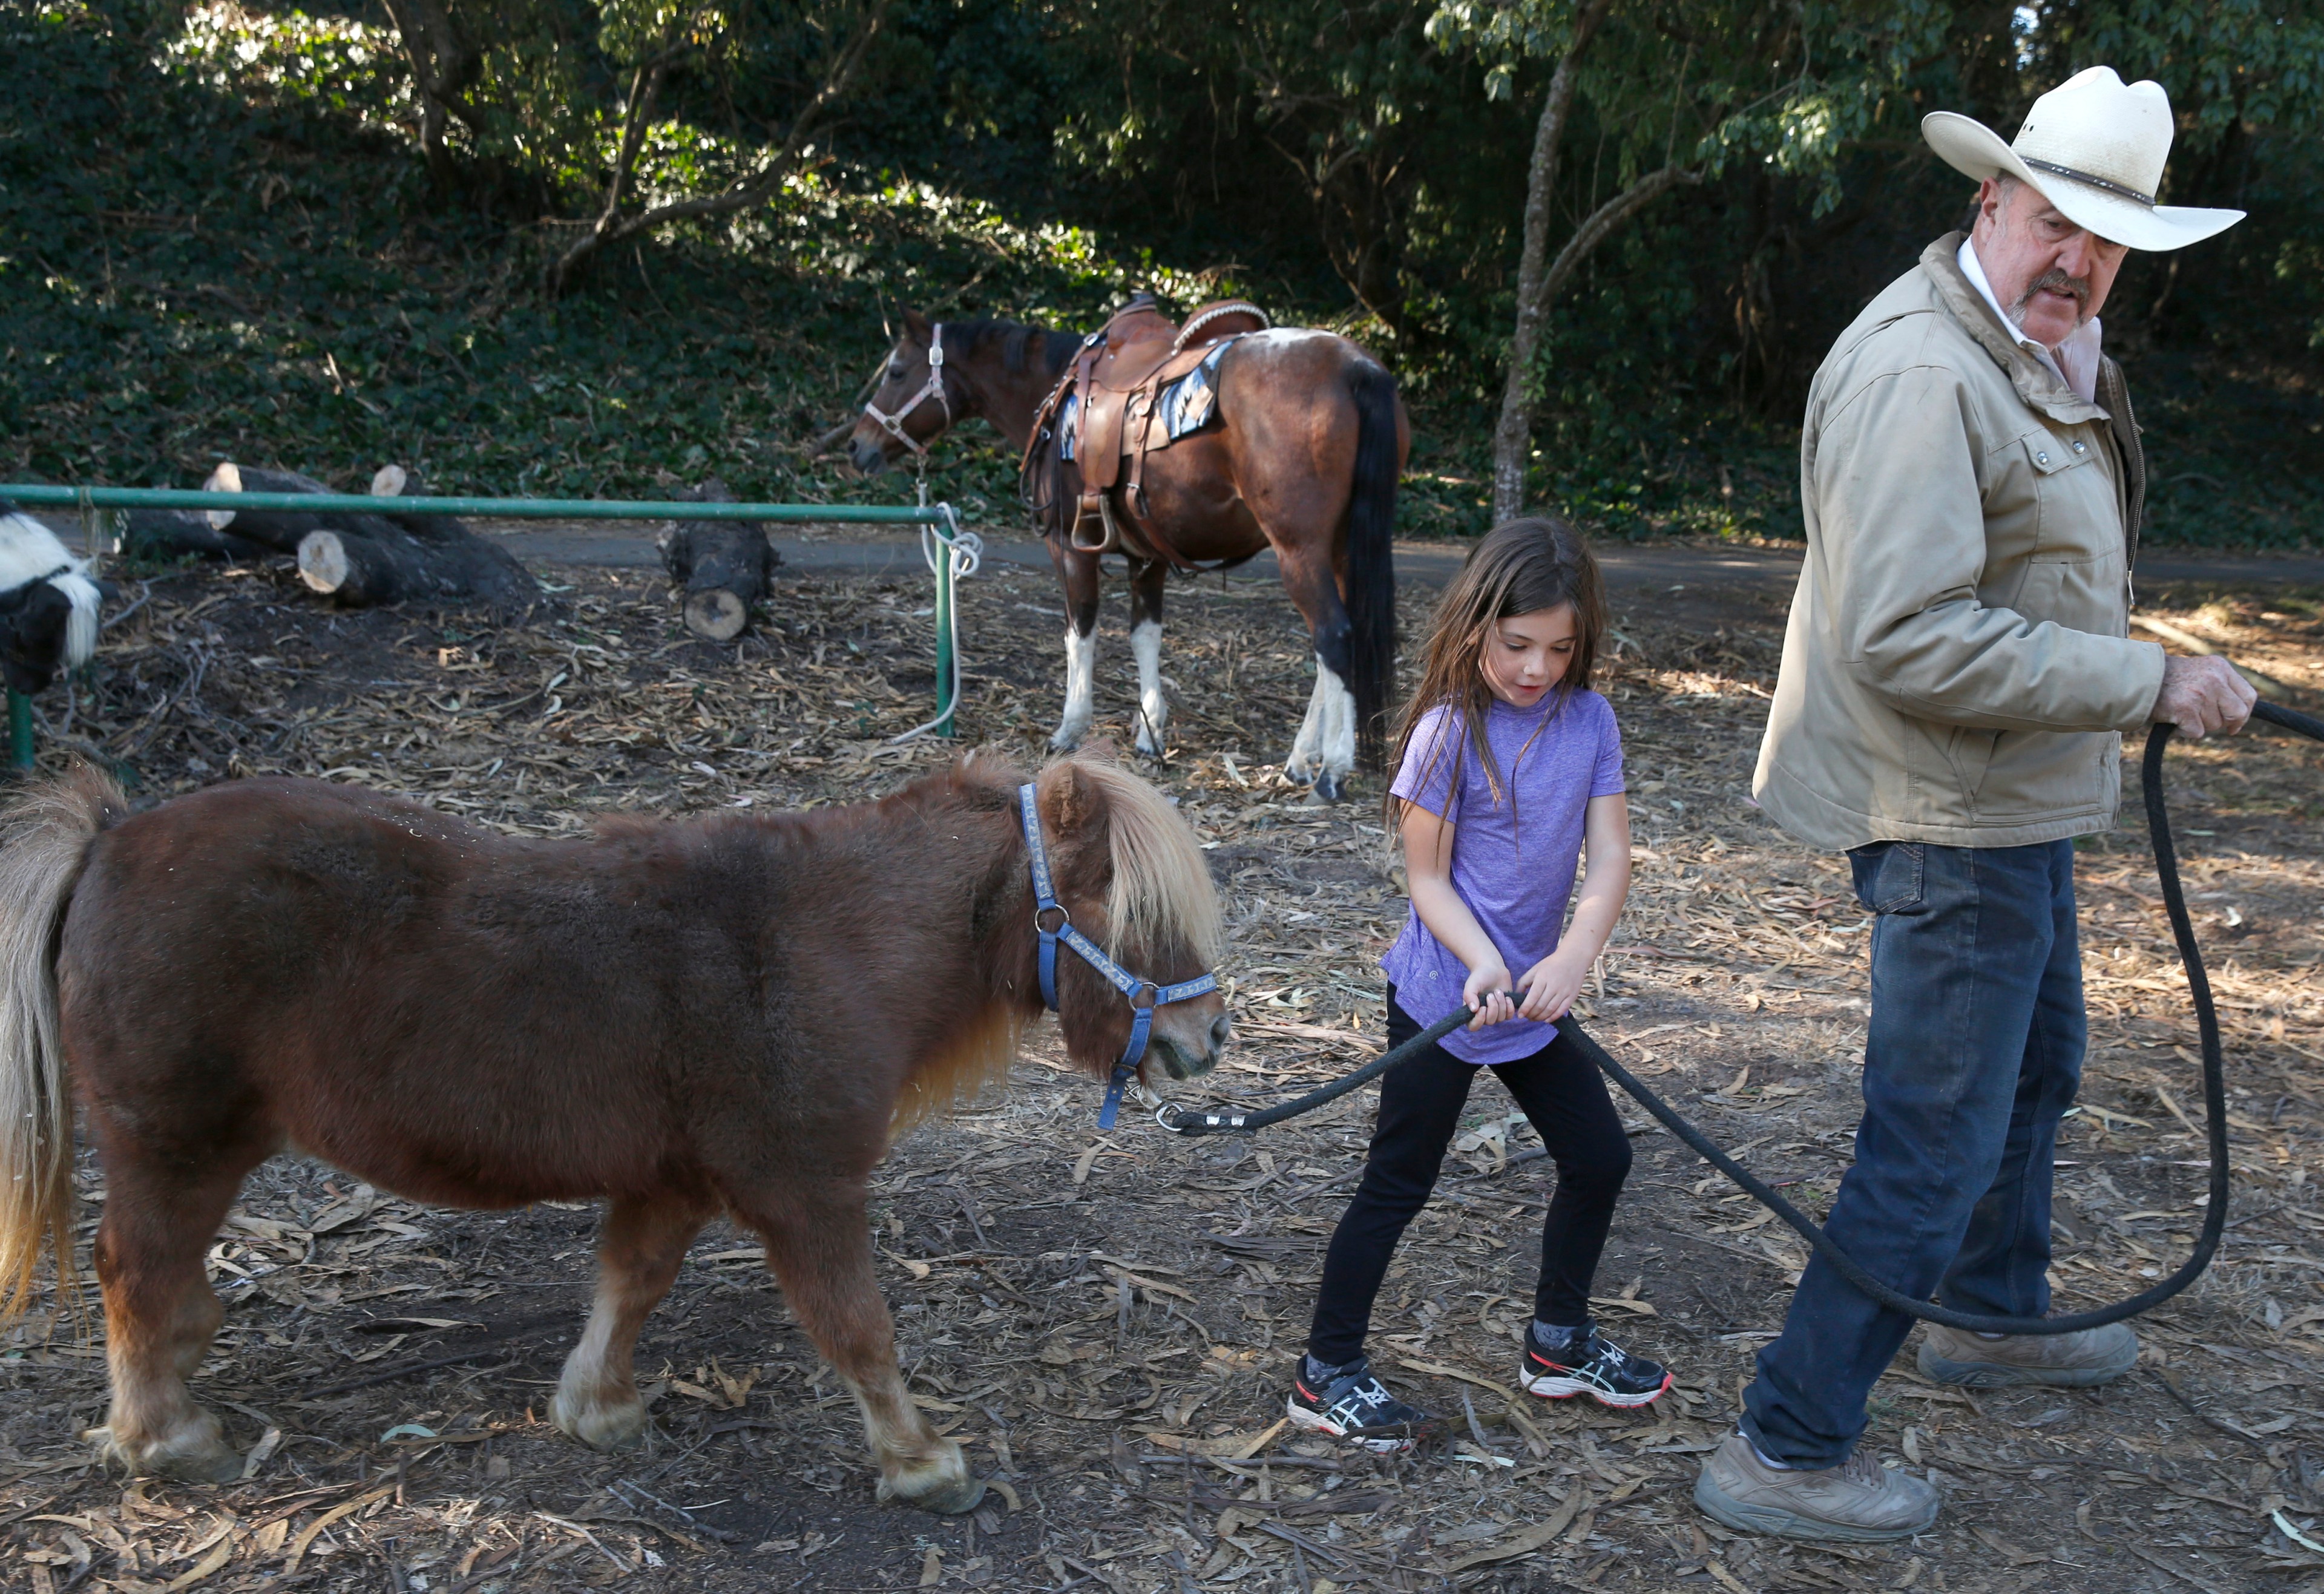 A girl leads a small pony, watched by an older man in a cowboy hat, near other horses and logs in a rustic setting.